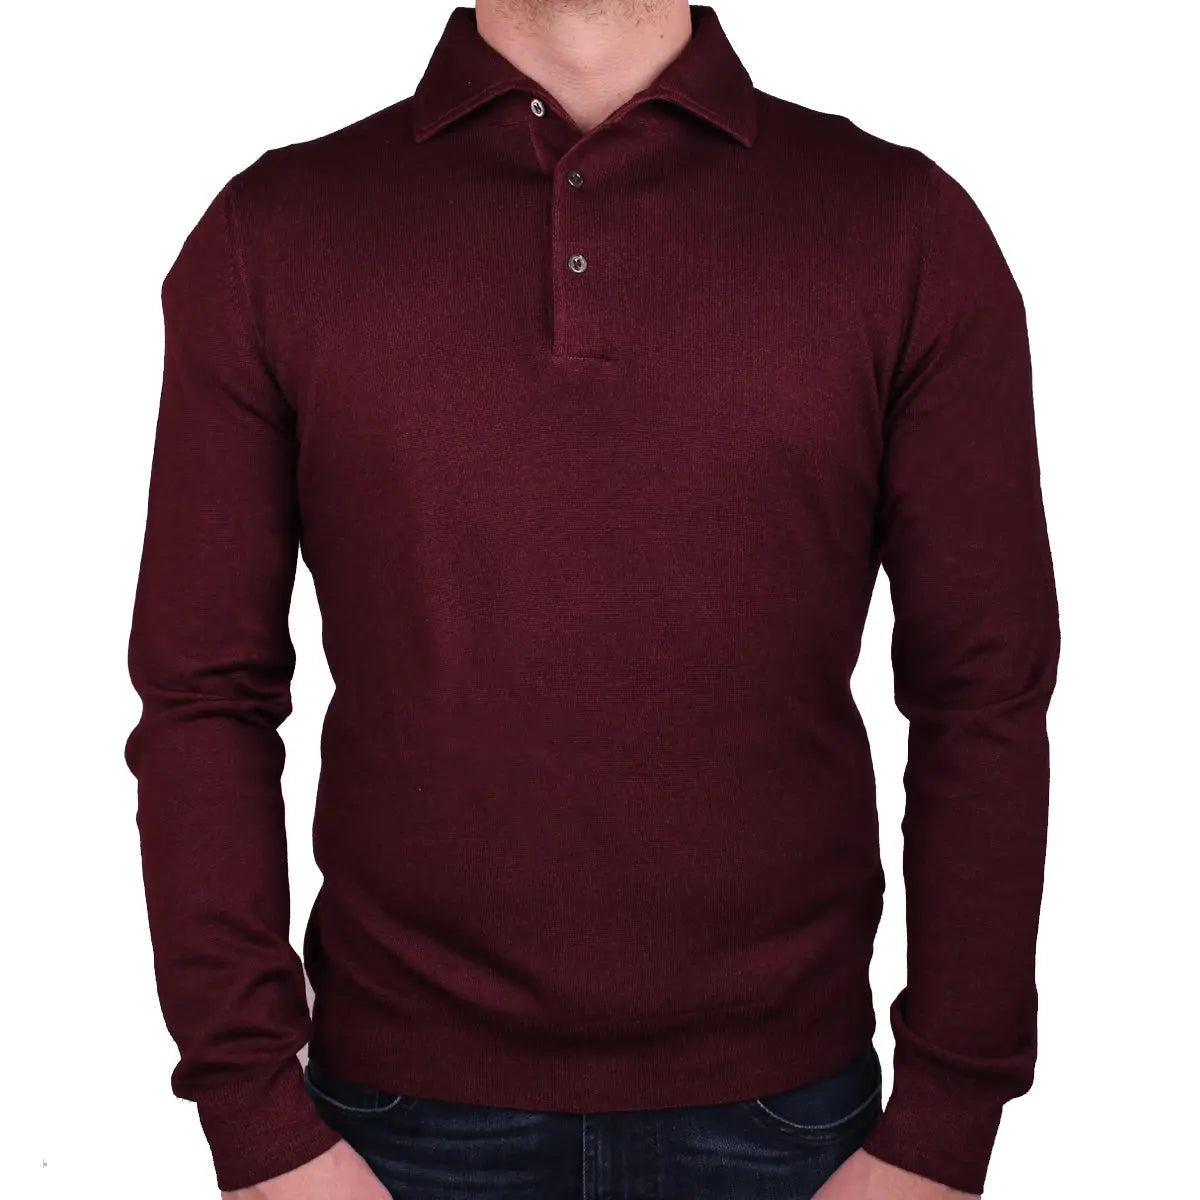 Burgundy Garment Dyed Wool Polo Sweater  Robert Old   